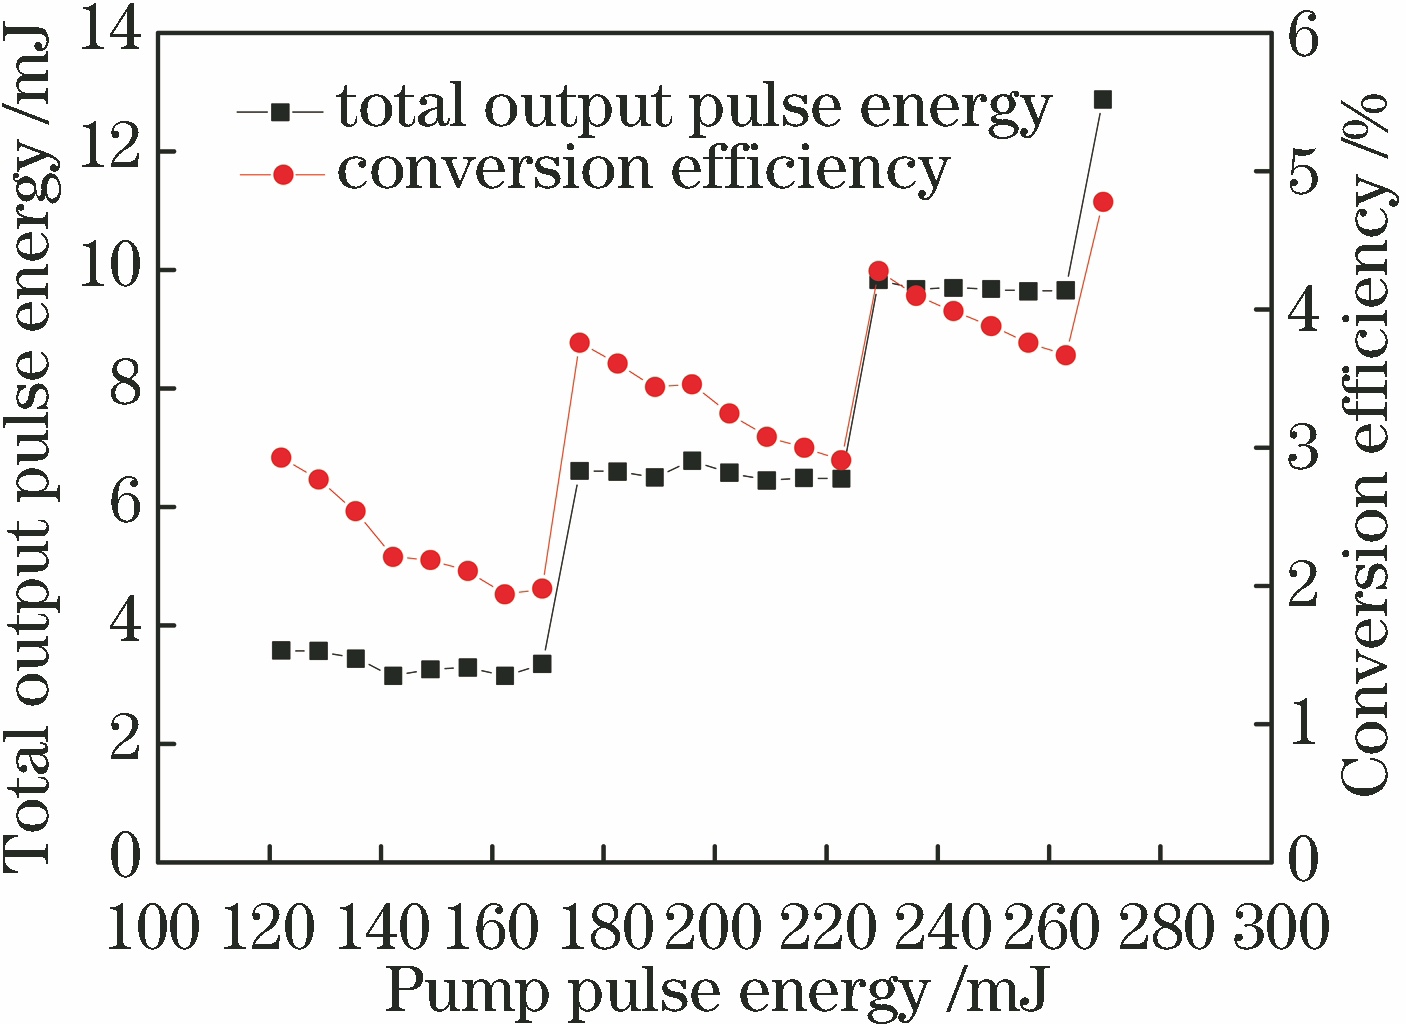 Total output pulse energy and conversion efficiency versus pump pulse energy